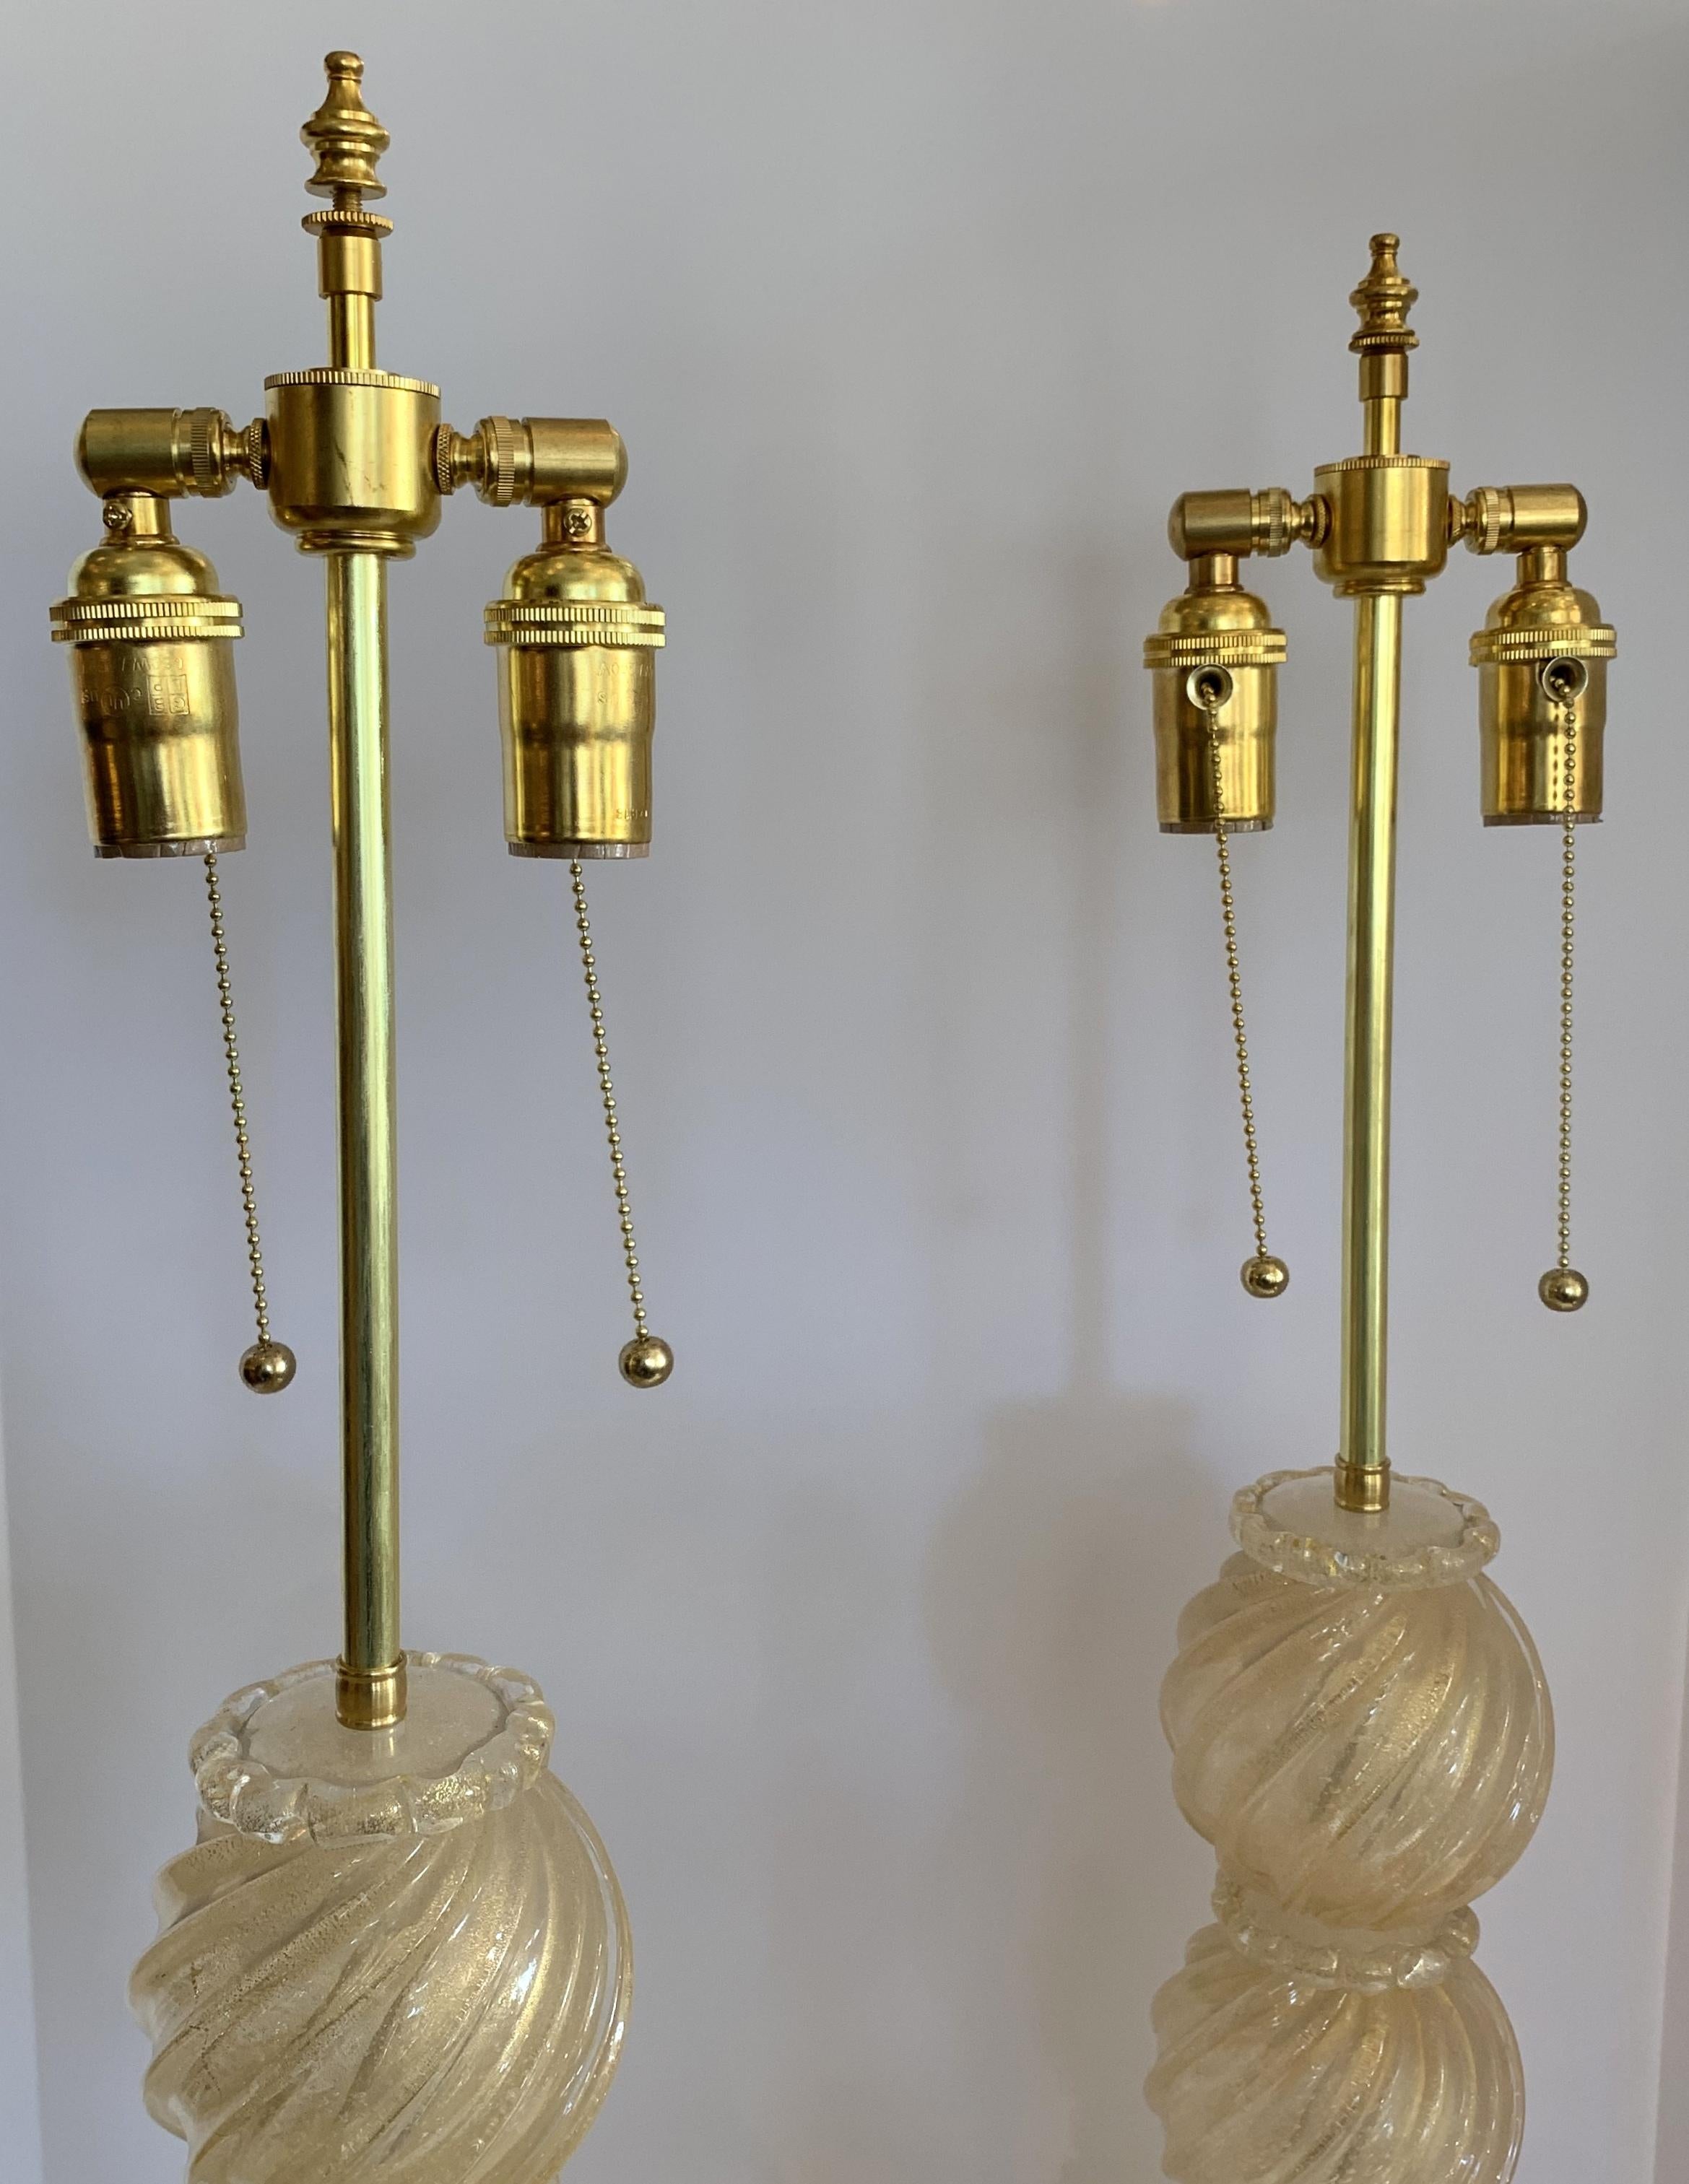 A wonderful pair of Mid-Century Modern Italian / Murano Venetian swirl form gold flake and clear color art glass lamps in the art deco style with new brass fittings and wiring.
Purchased from Lorin Marsh.